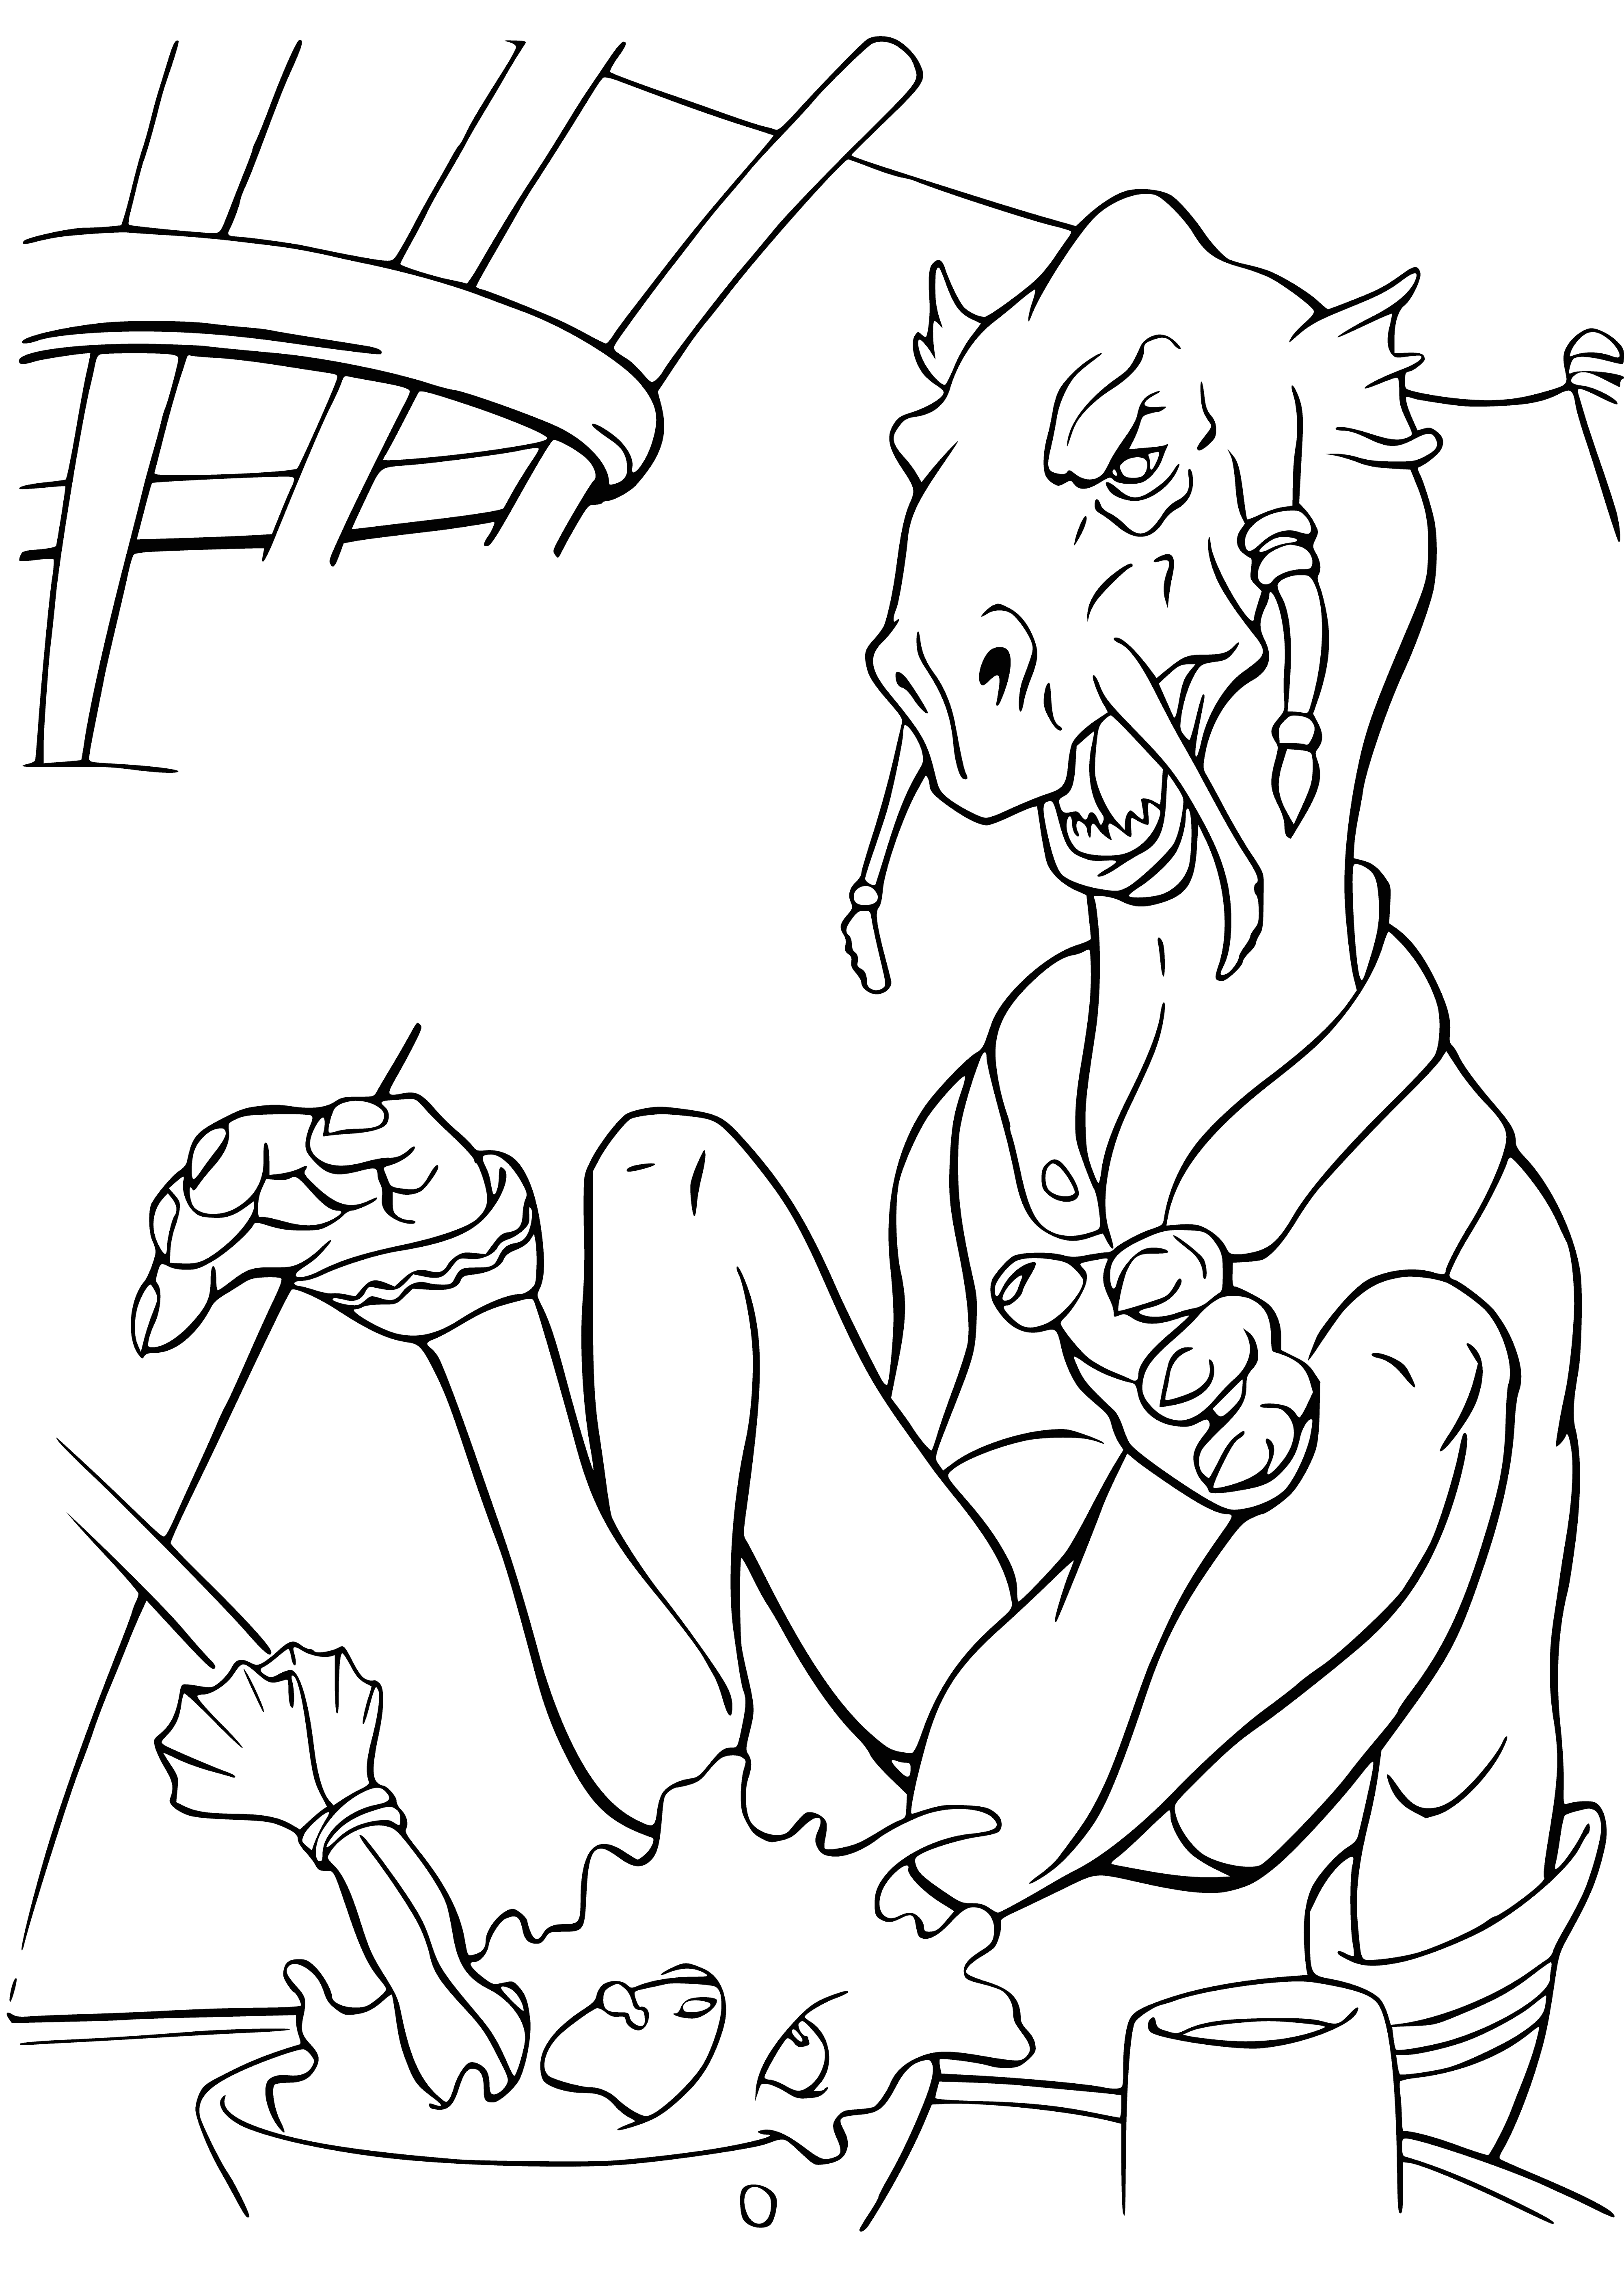 coloring page: Sebulba is a cunning and aggressive pod racer from Malastare, known for his rivalry with Anakin Skywalker and his dirty tactics on the track.